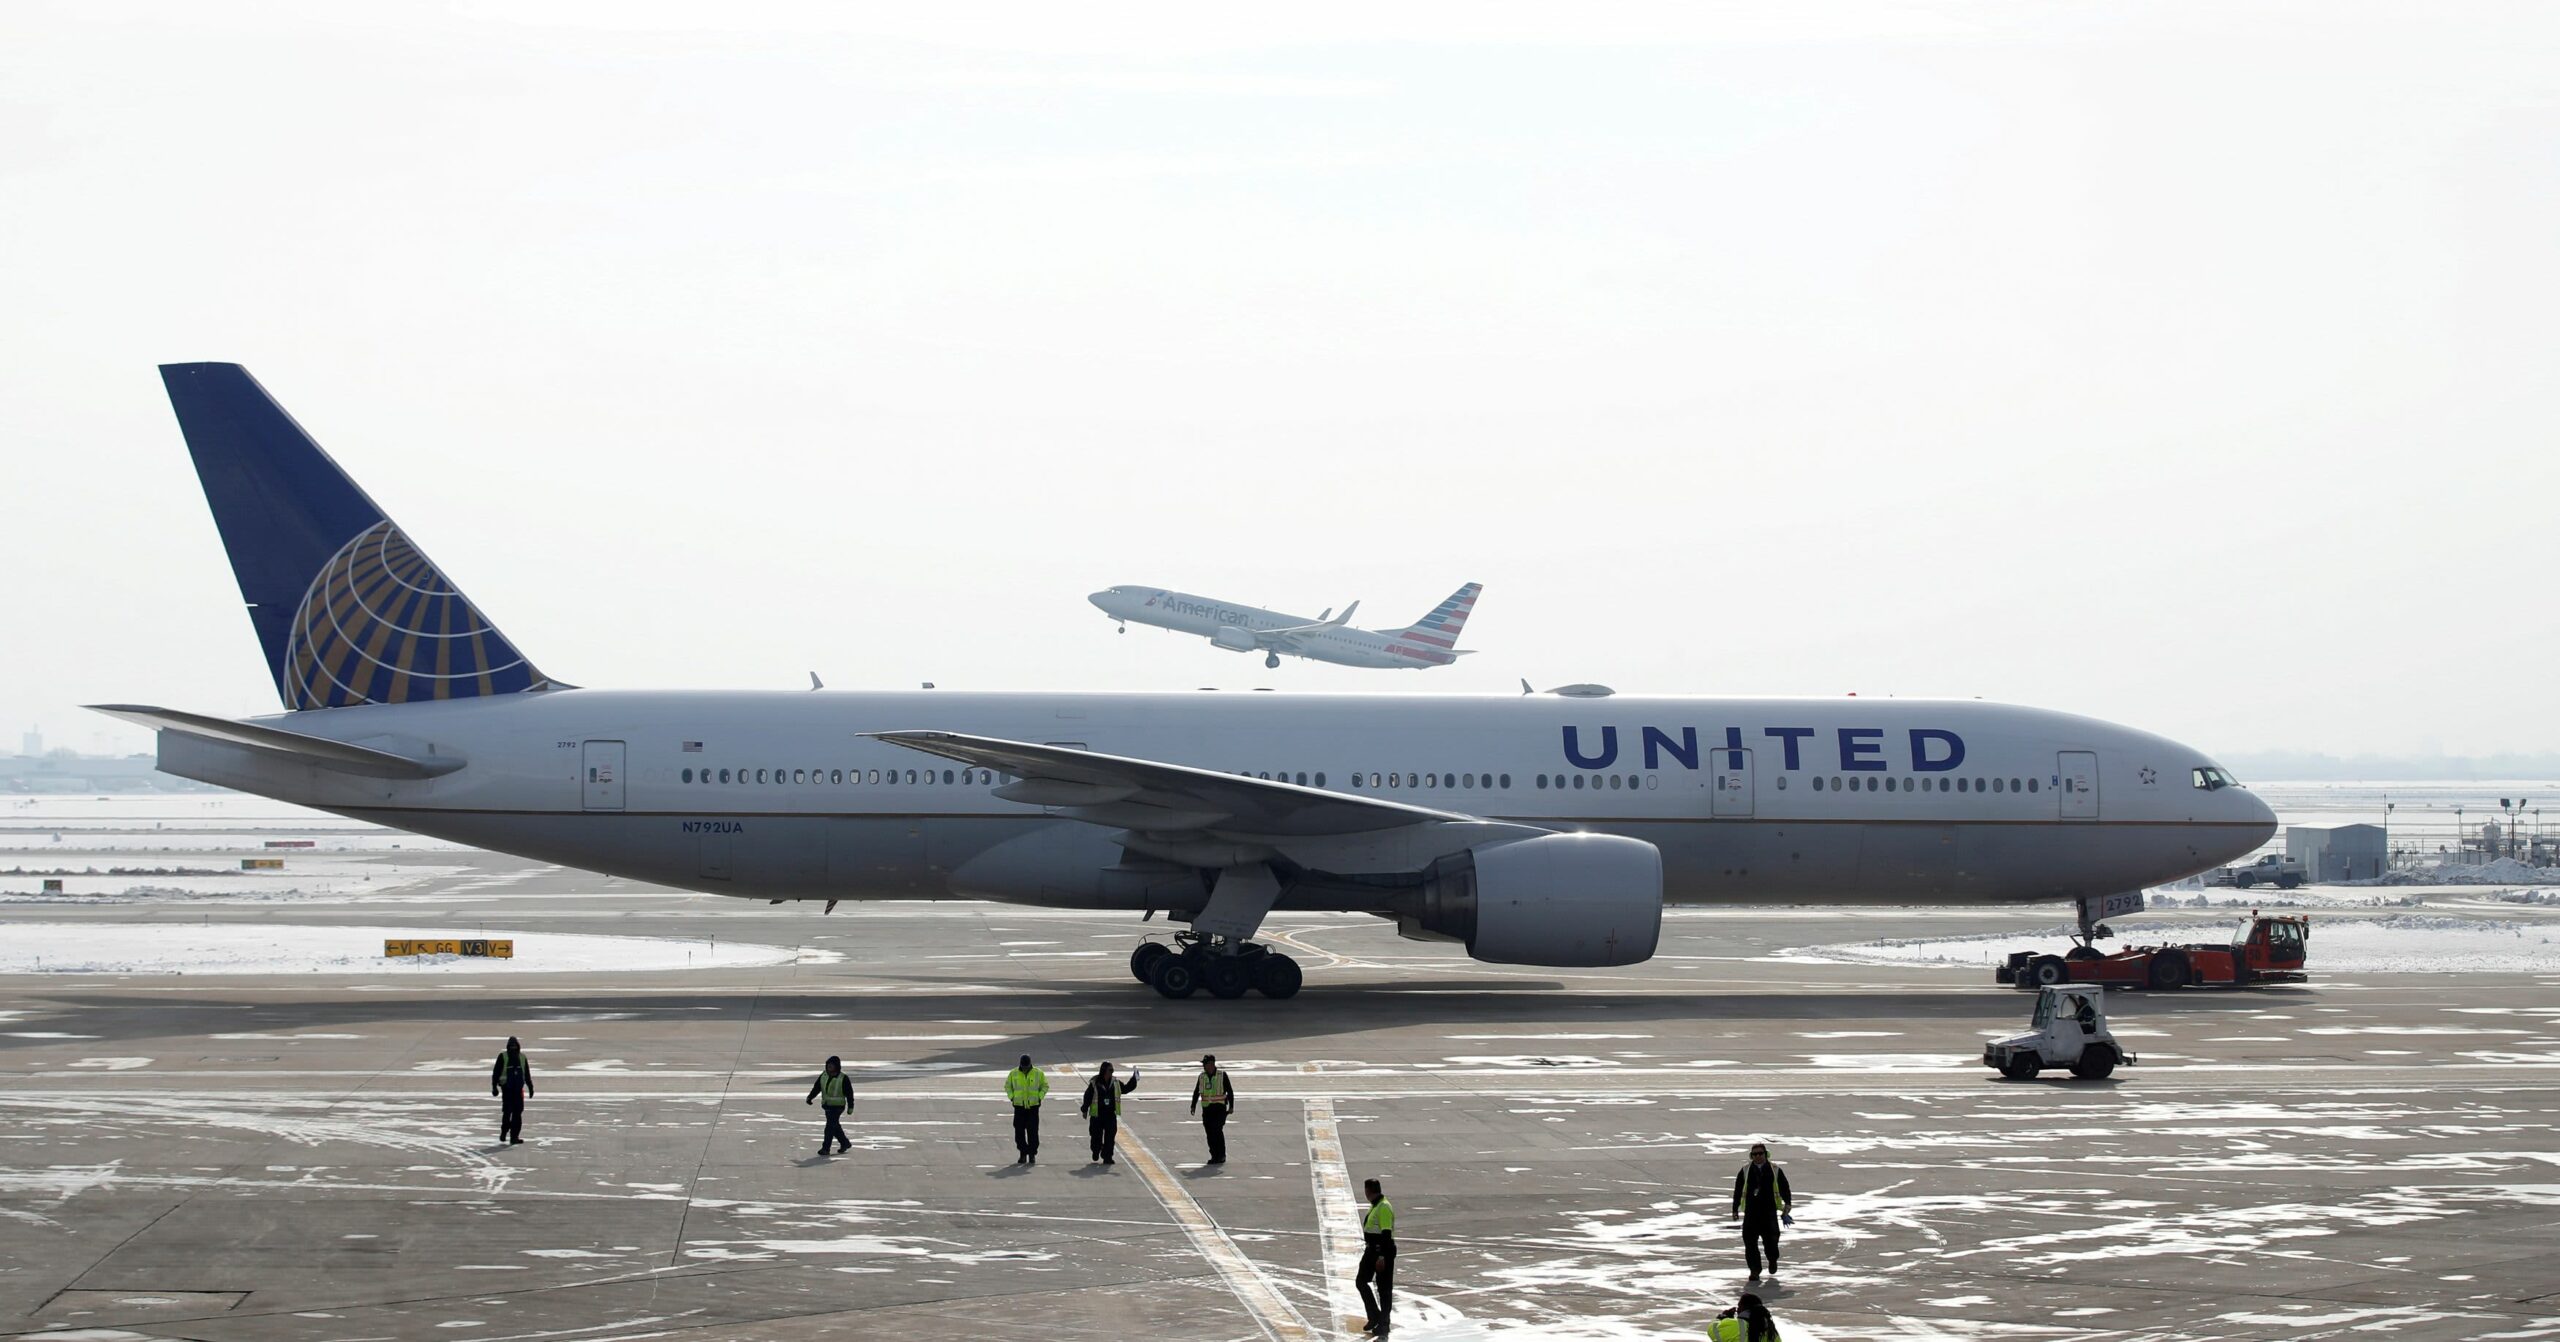 United would require new workers to point out proof of Covid vaccine, following Delta